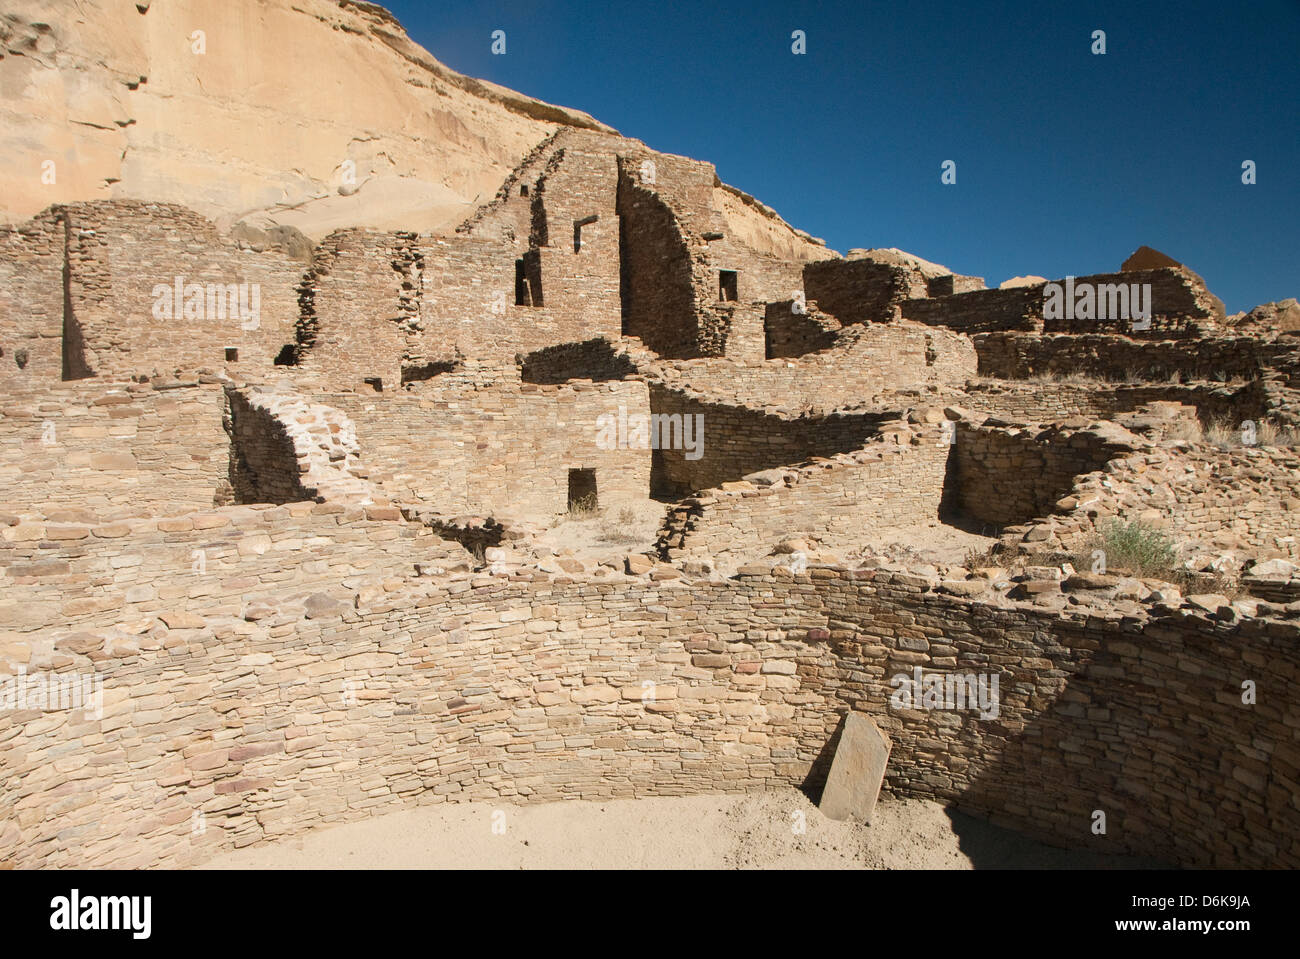 Chaco Culture National Historical Park, UNESCO World Heritage Site, New Mexico, United States of America, North America Stock Photo